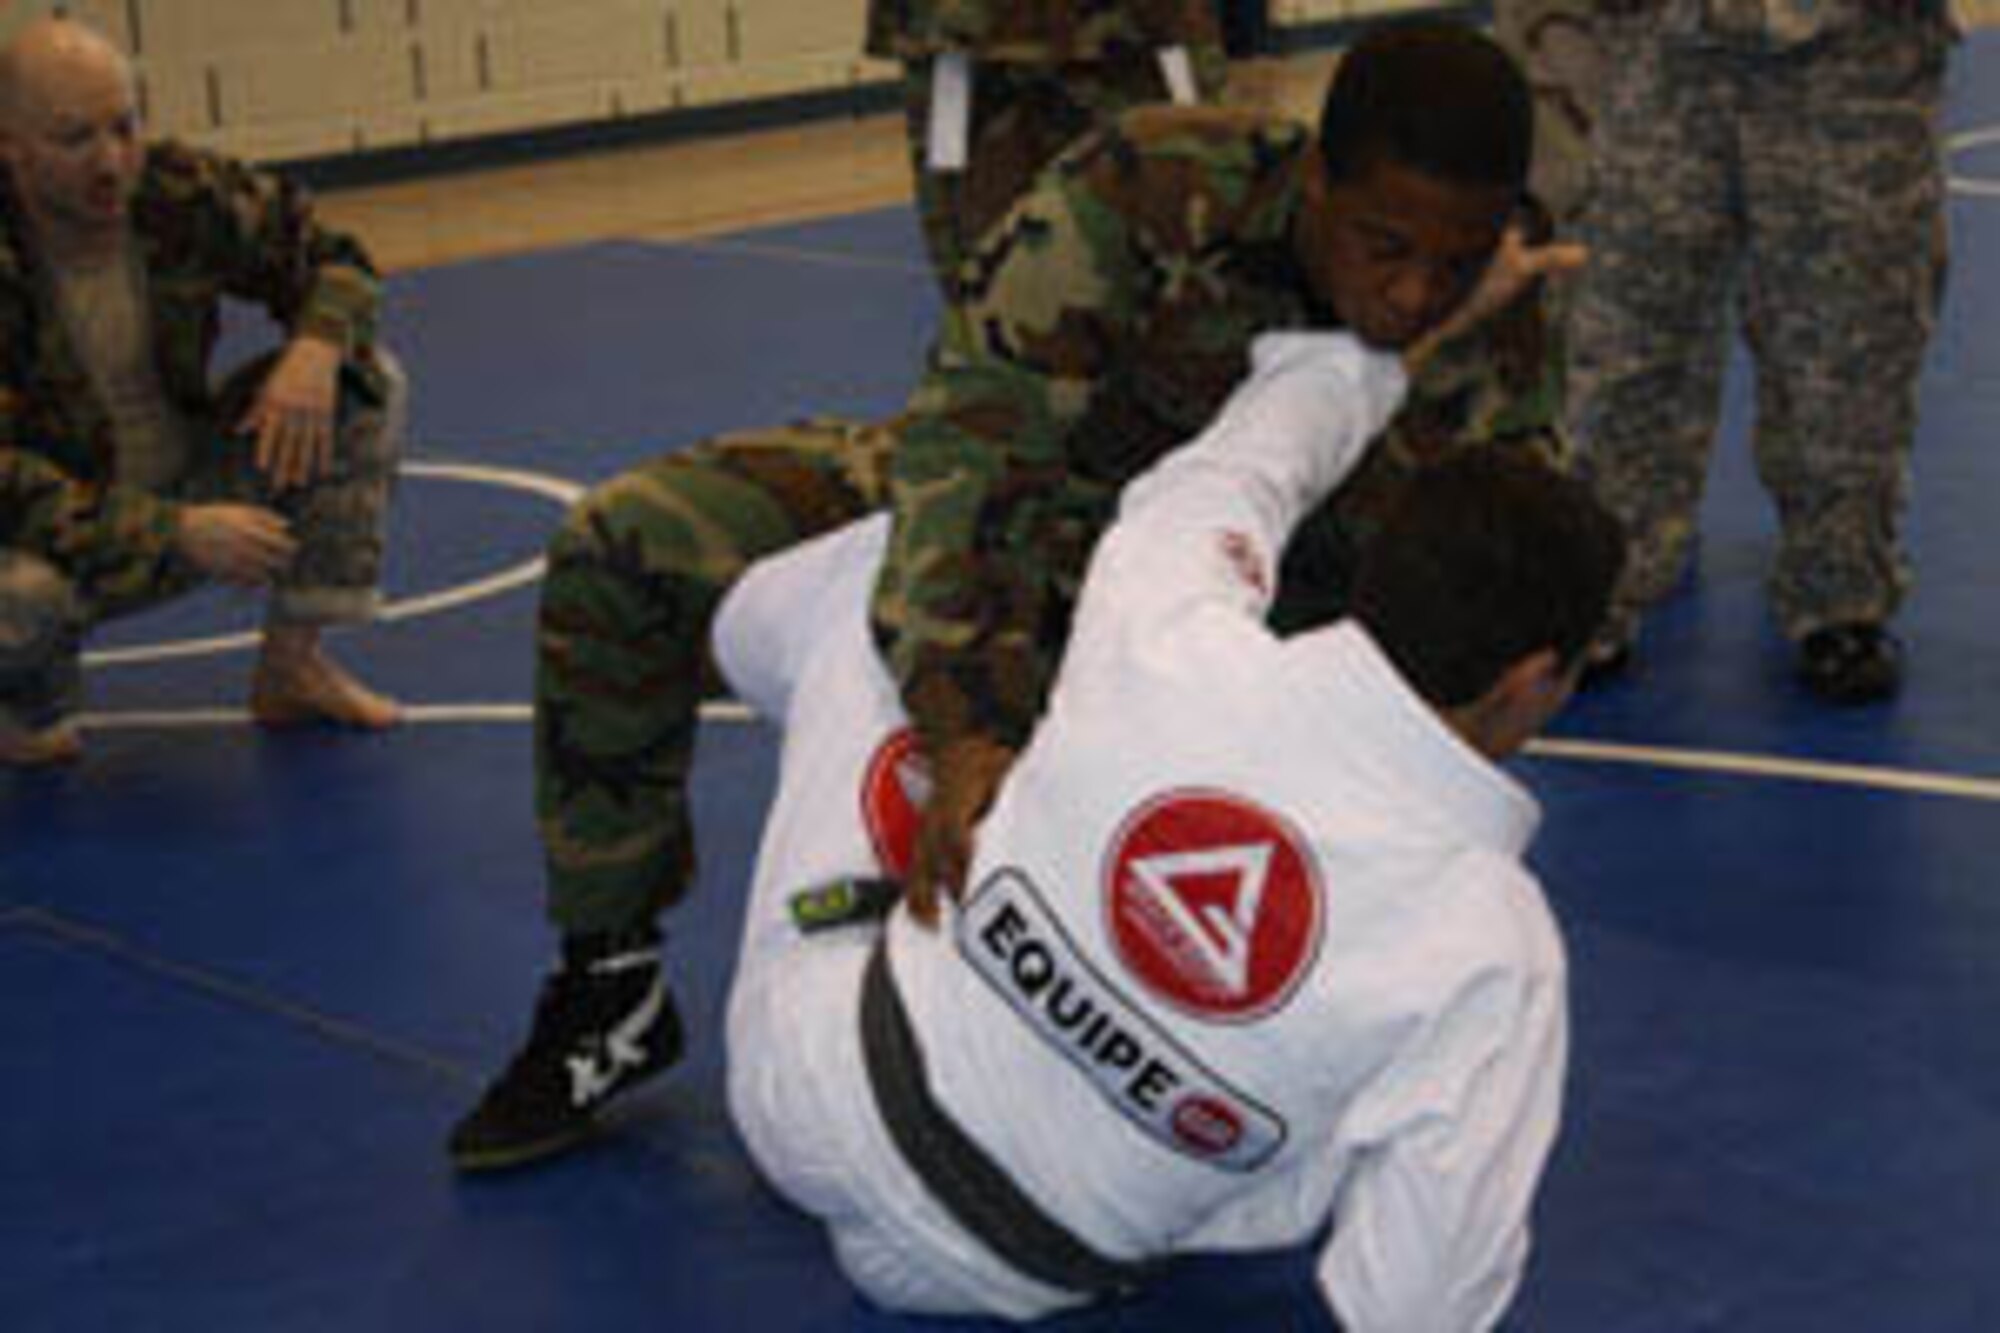 Professor Marcos Barros (in white), a black belt in Gracie Ju Jitsu, teaches combative techniques to SSgt Ruel Taylor of the 110th AOG while Army Spc David Kirby looks on.  Barros was visiting as a guest instructor during classes held at the 129th RTI facilities in Springfield, IL.